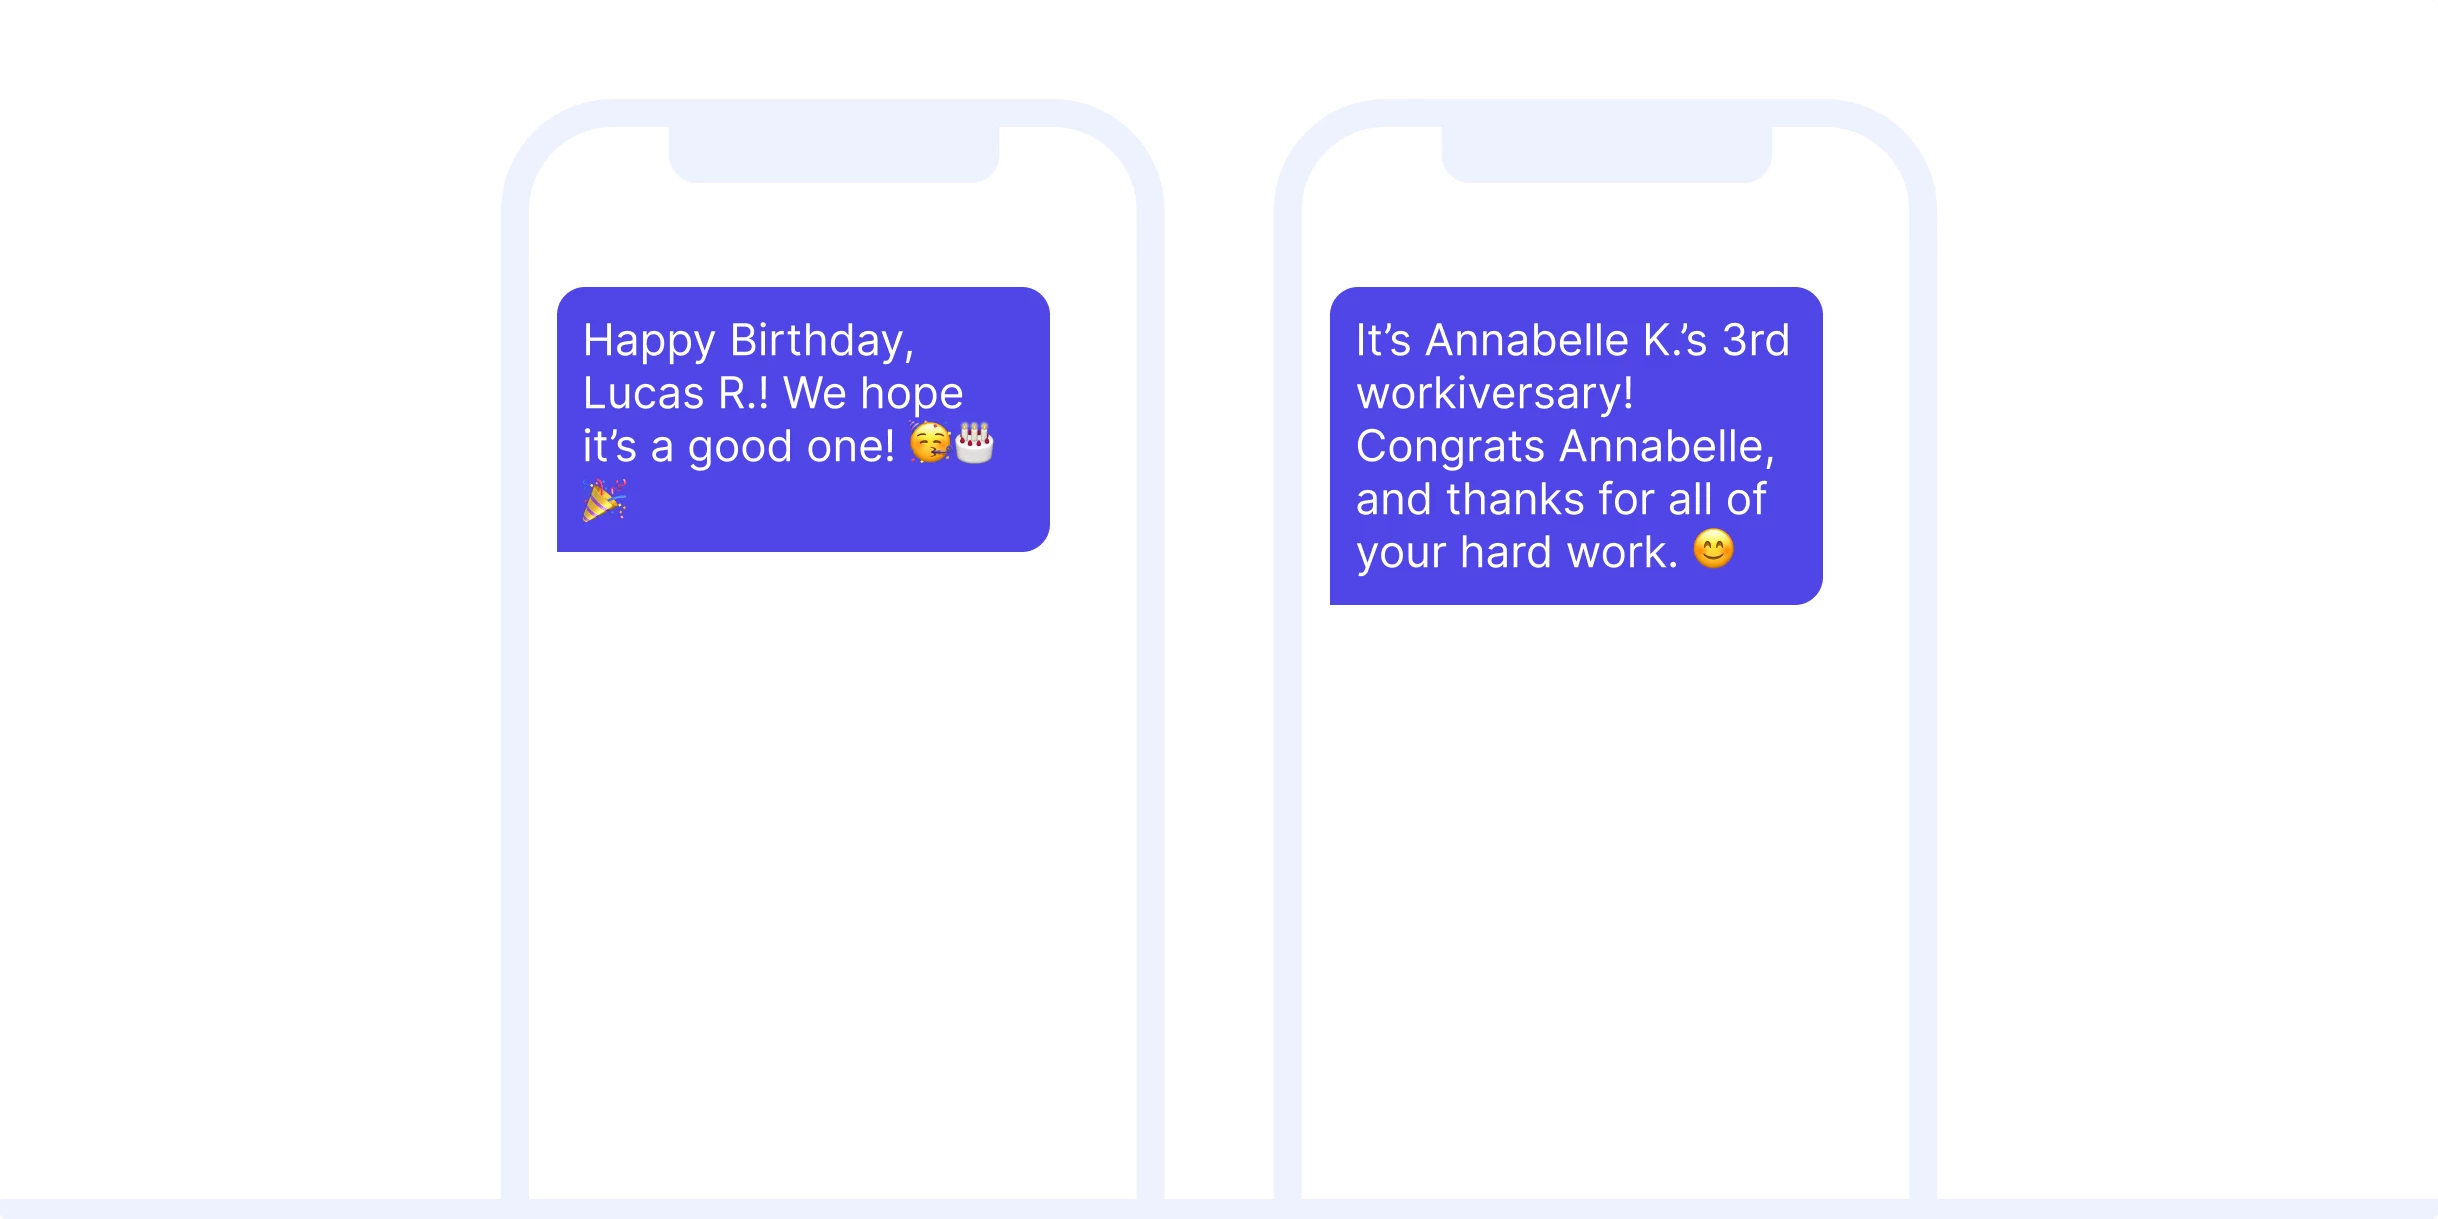 Transactional SMS examples for birthdays and work anniversaries.